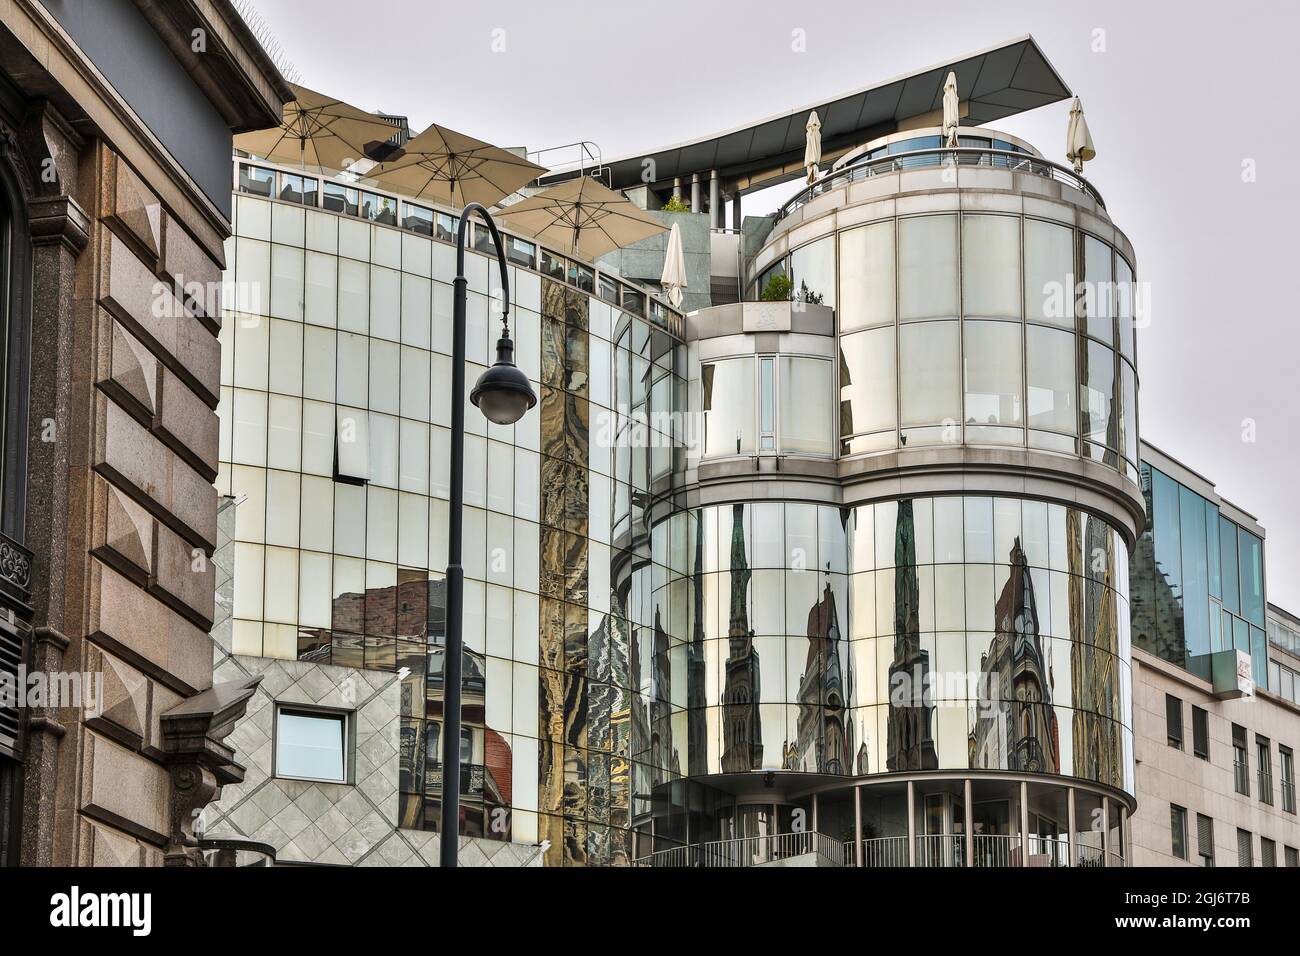 Europe, Austria, Vienna, Reflections of St. Stephen's Cathedral in the Inner City of Vienna, UNESCO World Heritage Site Stock Photo